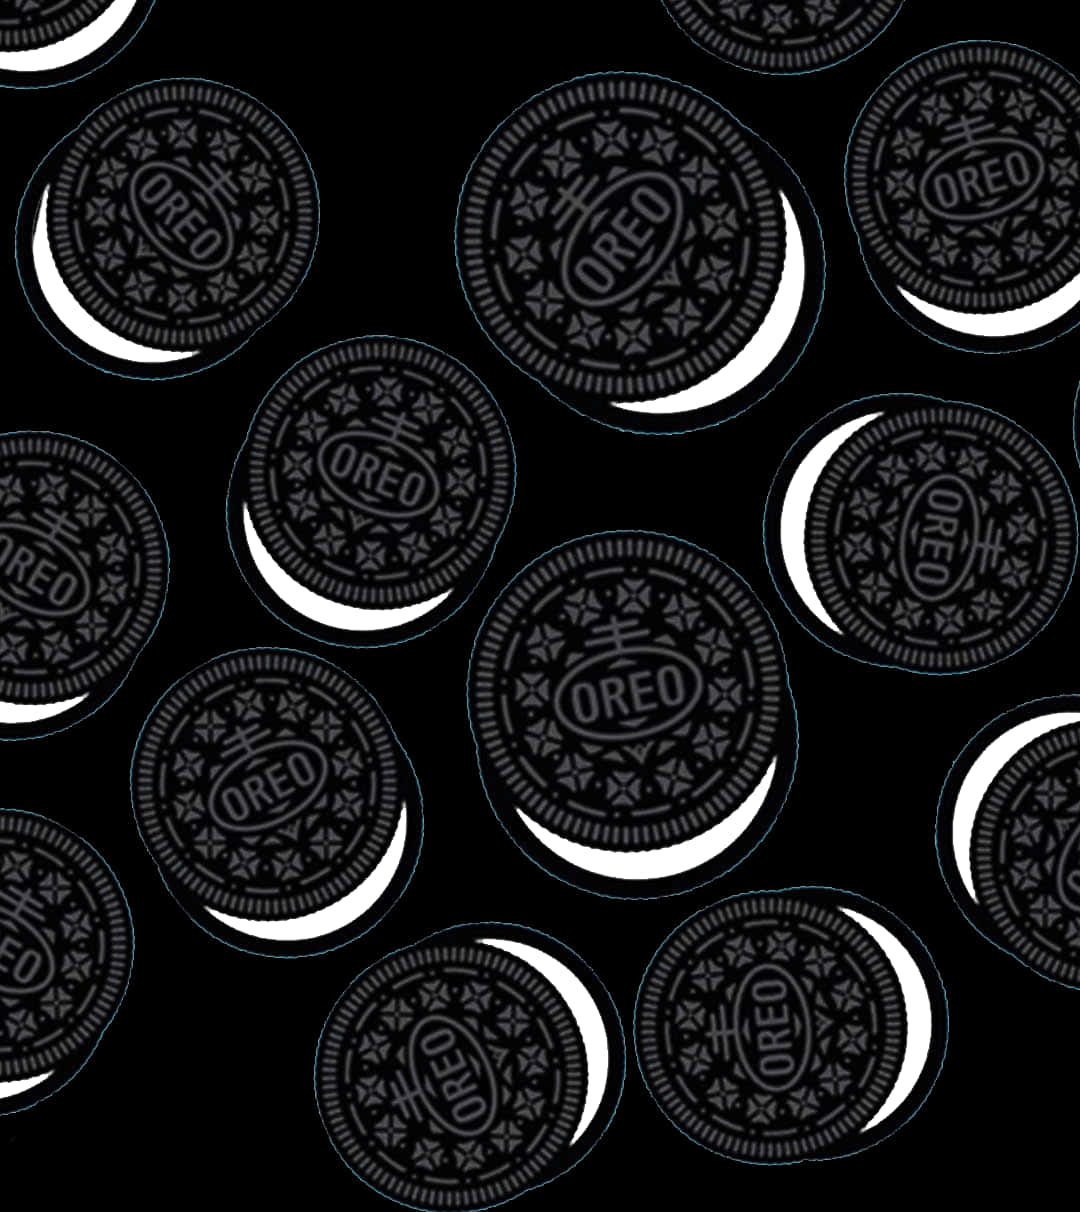 A black and white Oreo pattern on a black background - Oreo